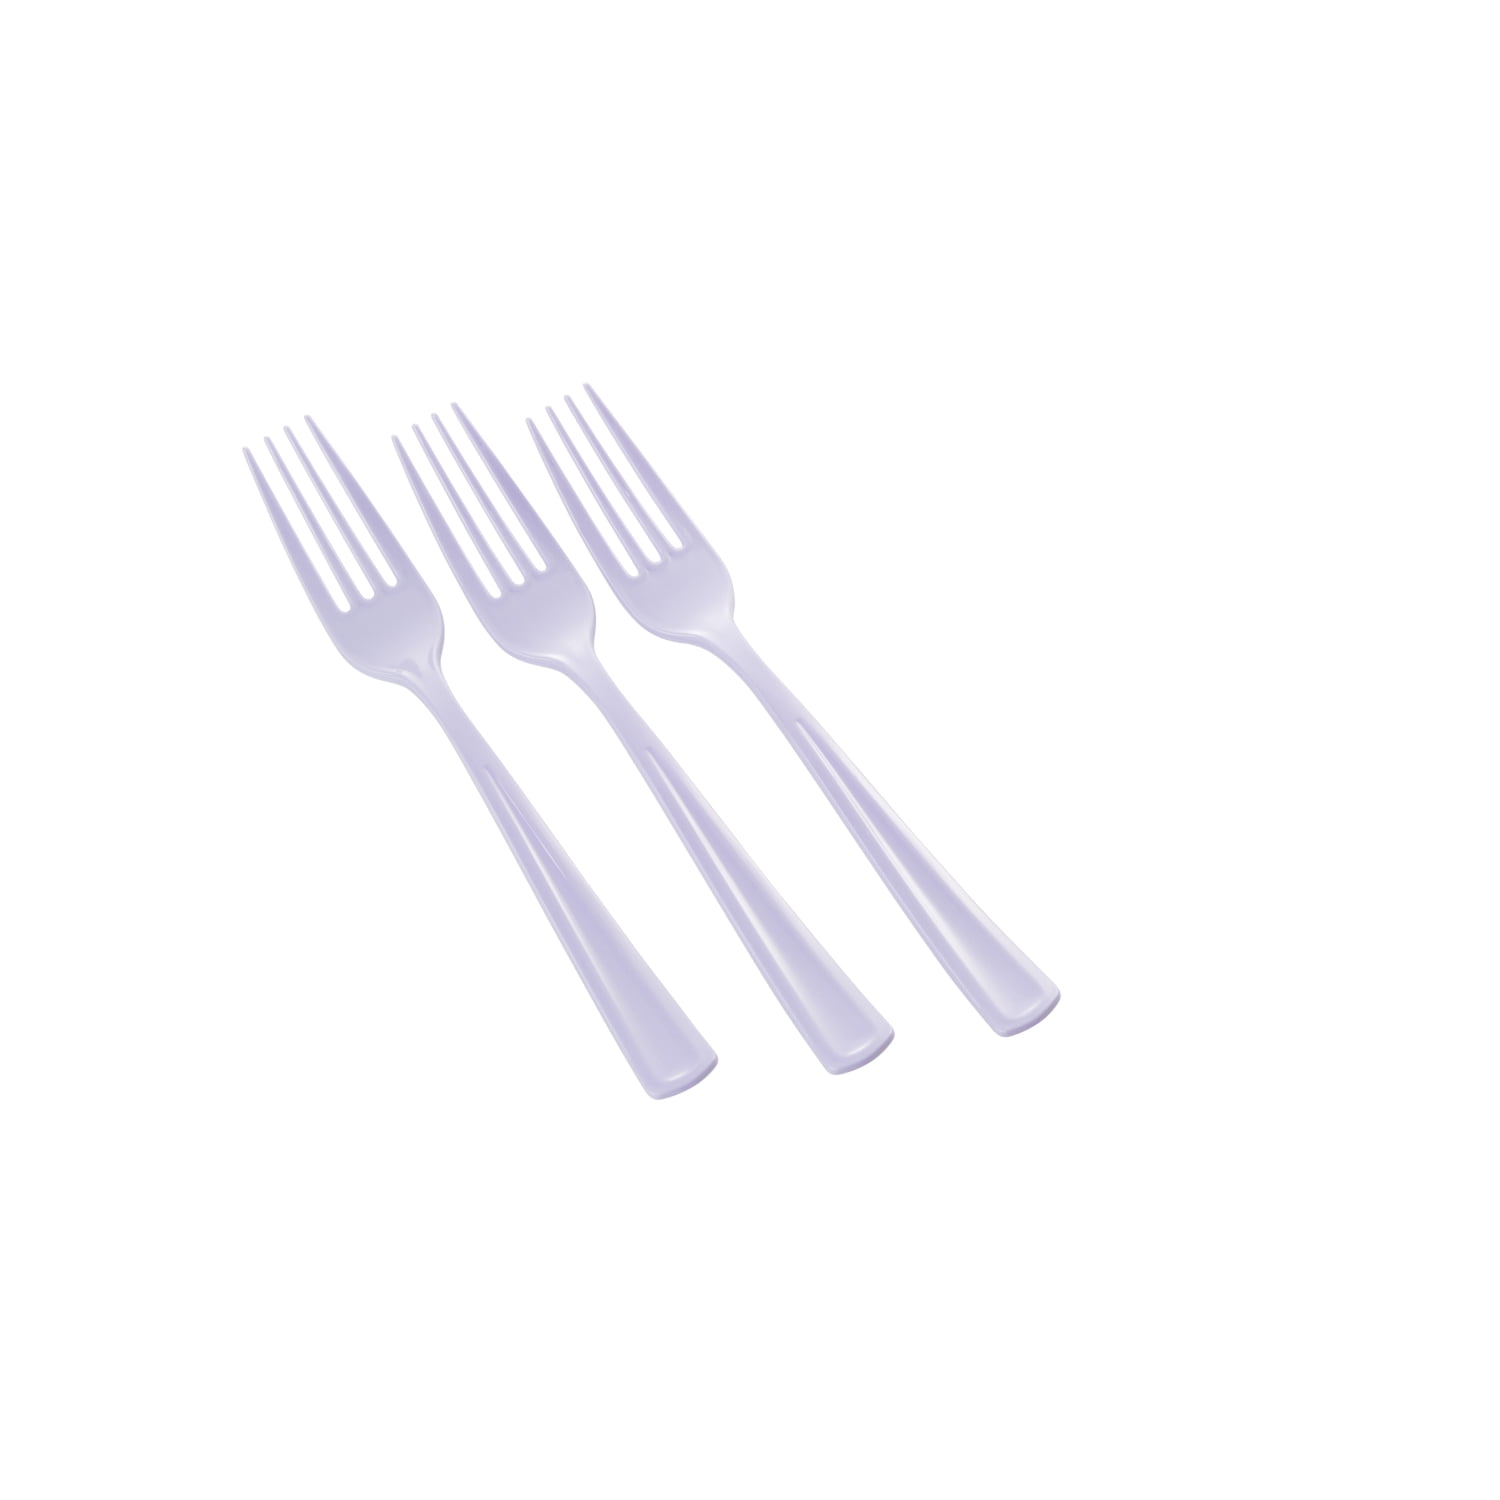 360 Ct Plastic Disposable-Formal Clear Extra Heavy Duty Washable.Reusable Forks 